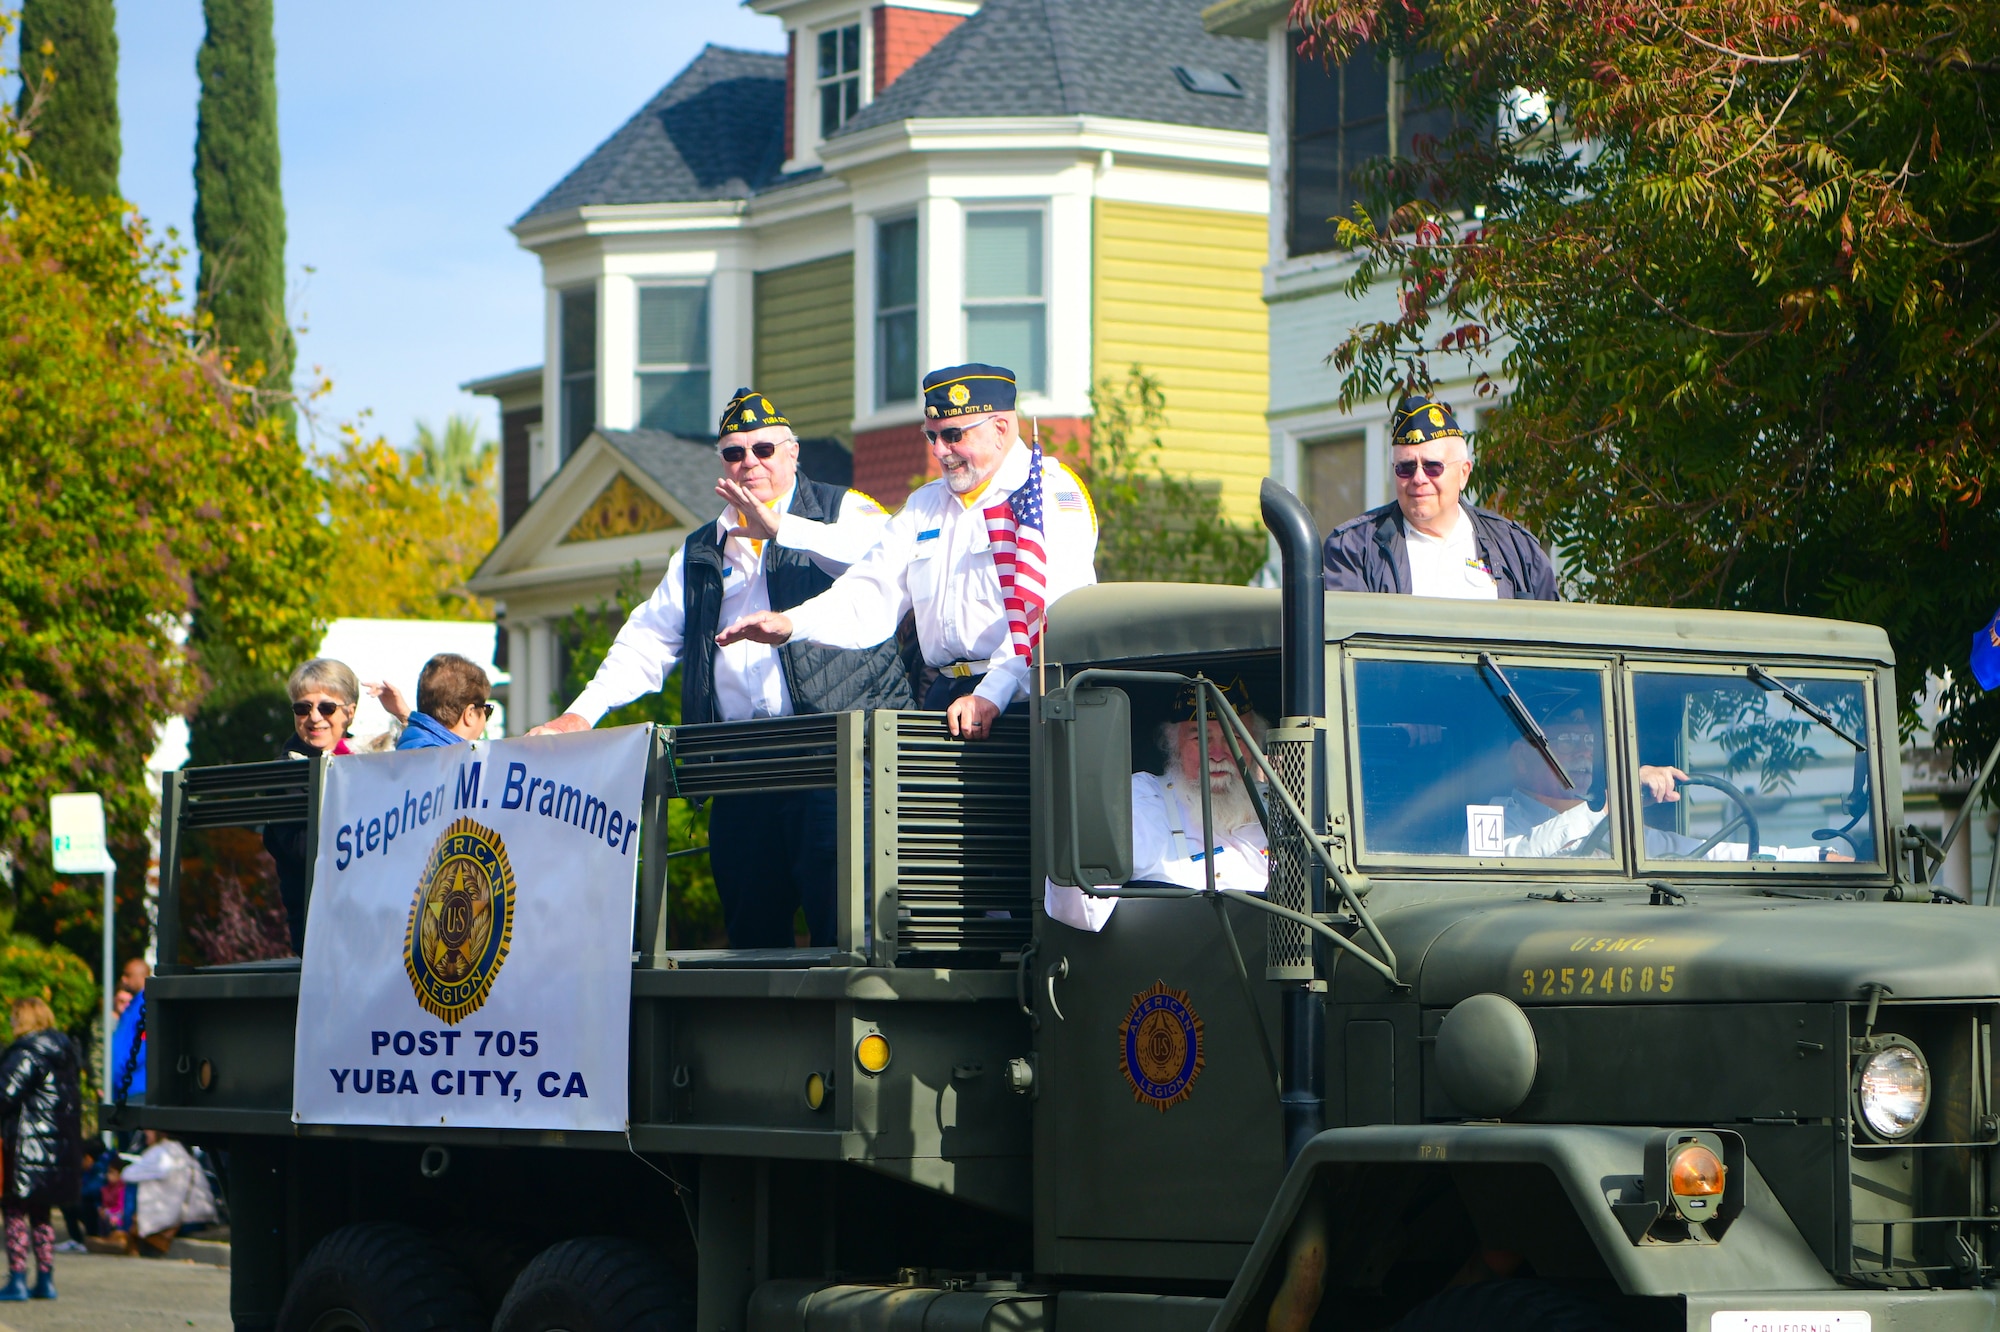 Participants in the parade wave to the crowd during the Veterans Day parade in Marysville, Calif., on Nov. 11, 2022.